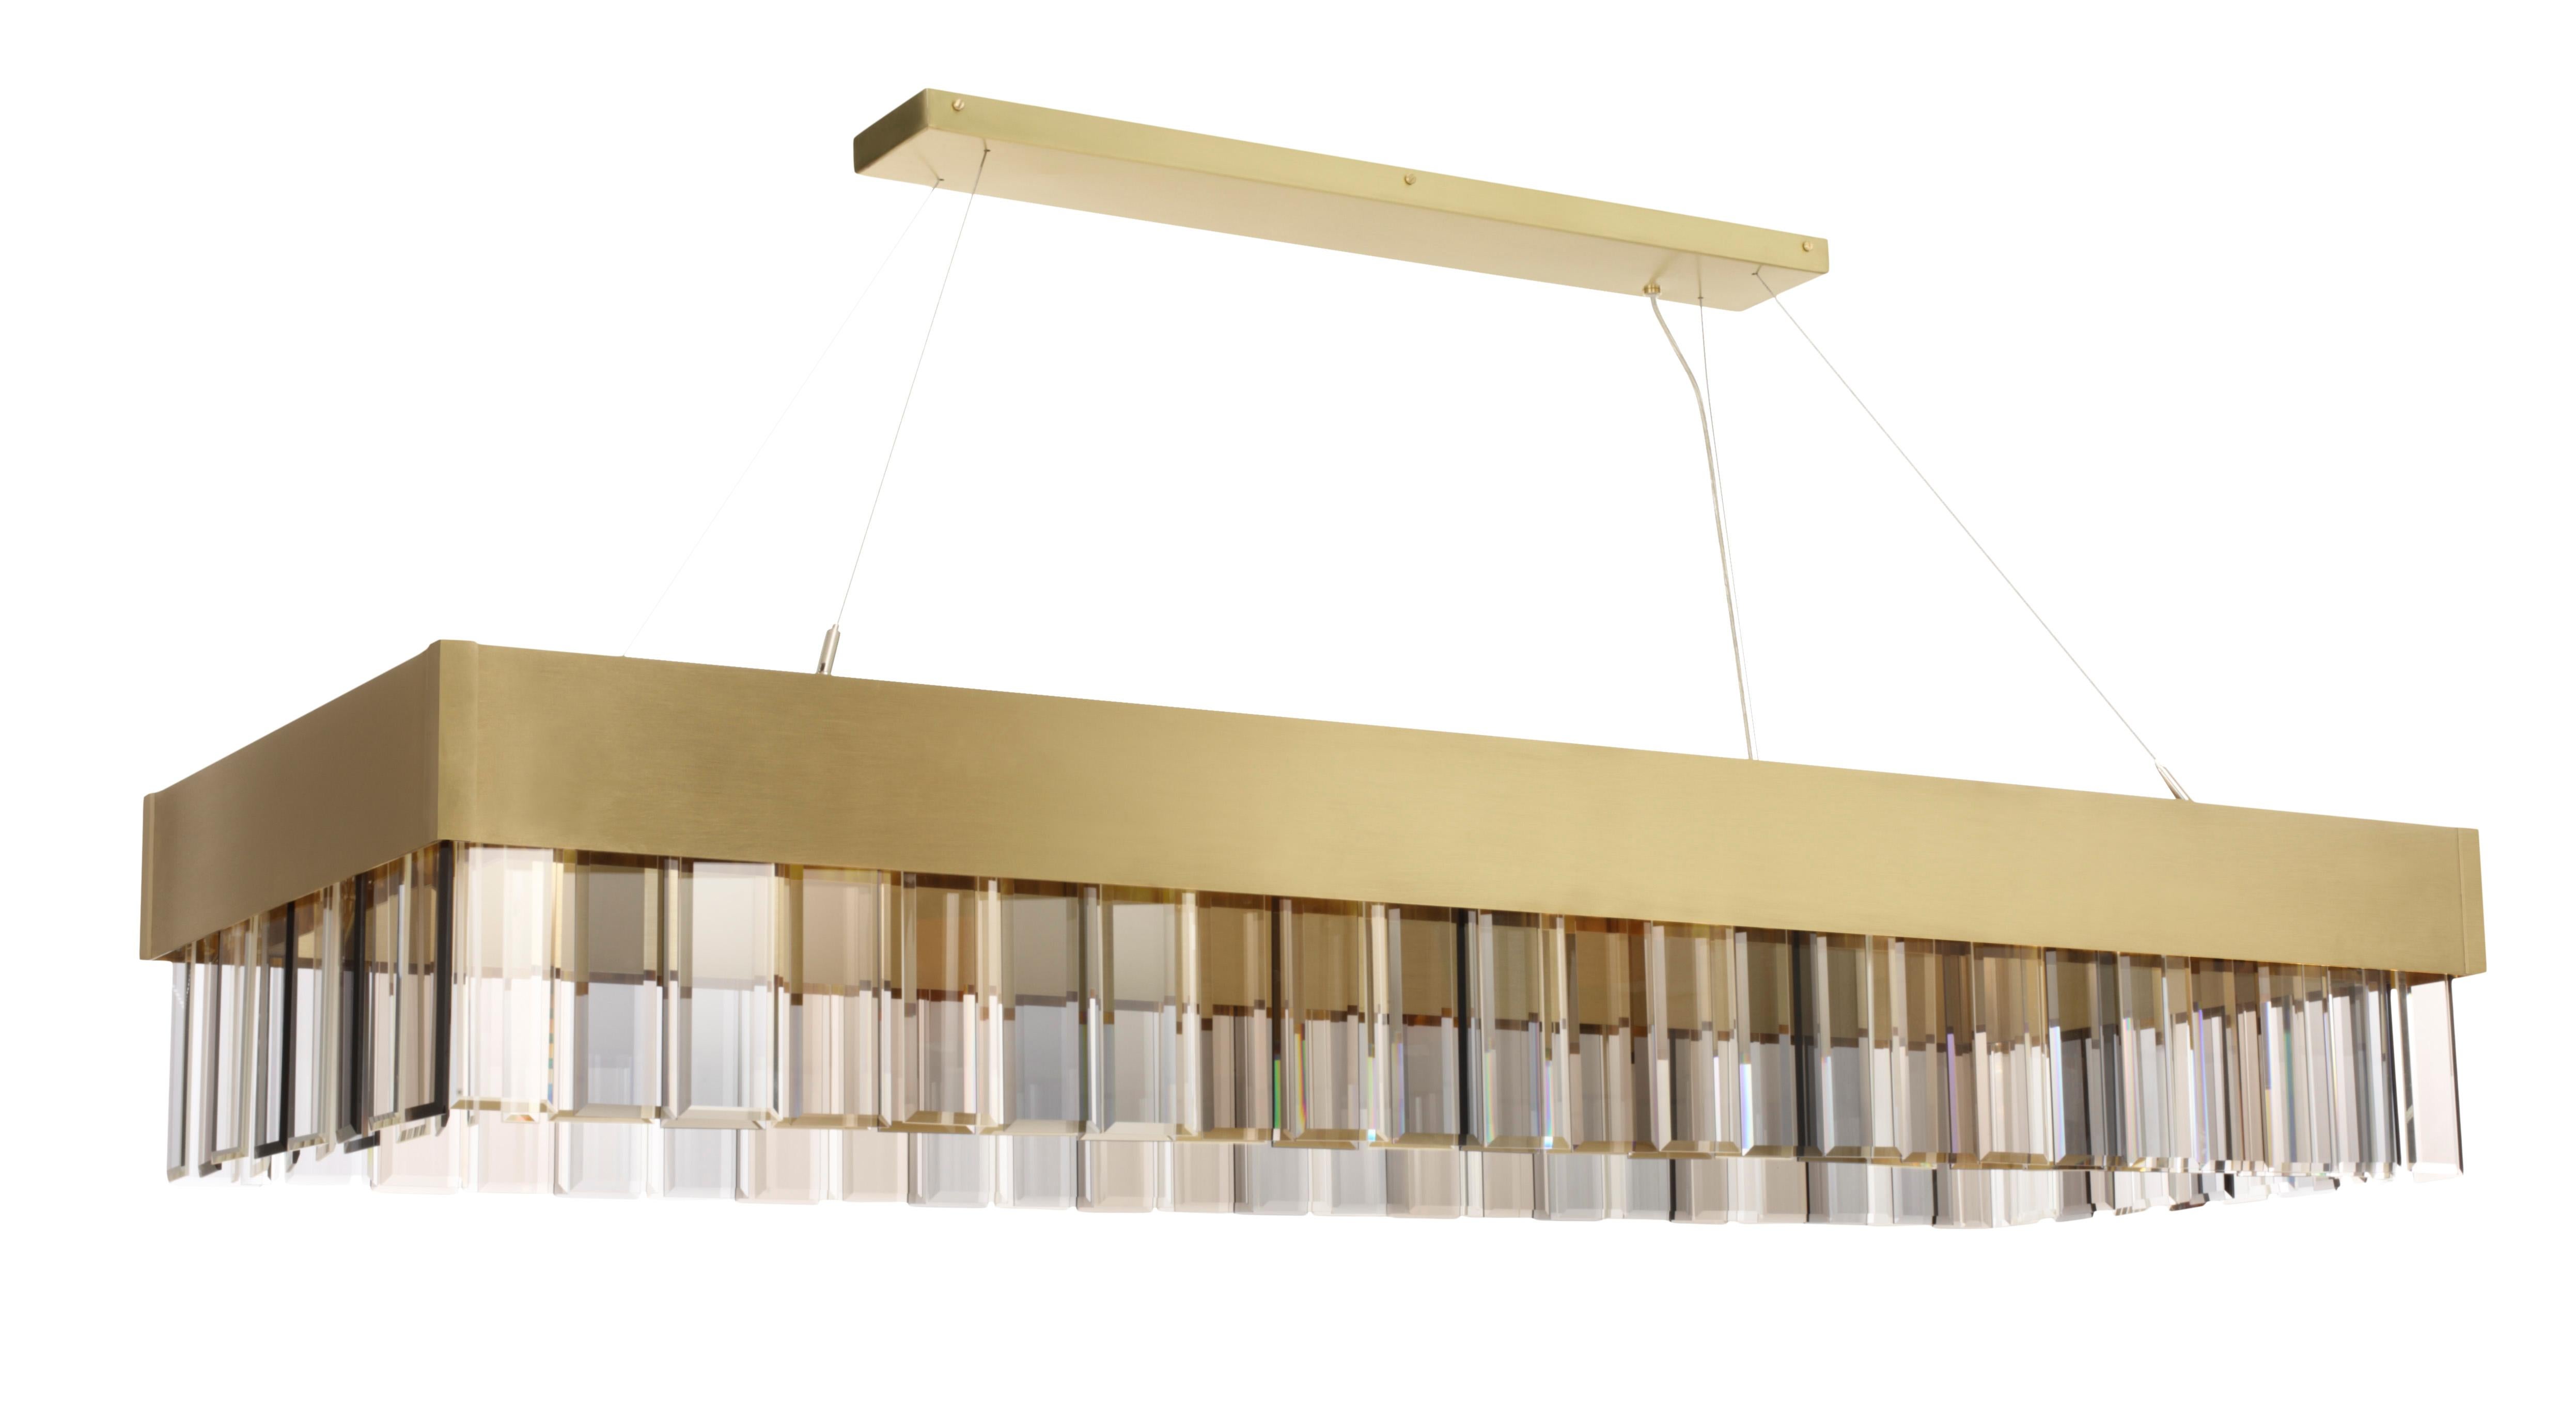 Solaris longlight pendant by CTO Lighting
Materials: satin brass with cut glass drops and stainless steel suspension wire/clear flex
Dimensions: H 25 x W 140 cm 

All our lamps can be wired according to each country. If sold to the USA it will